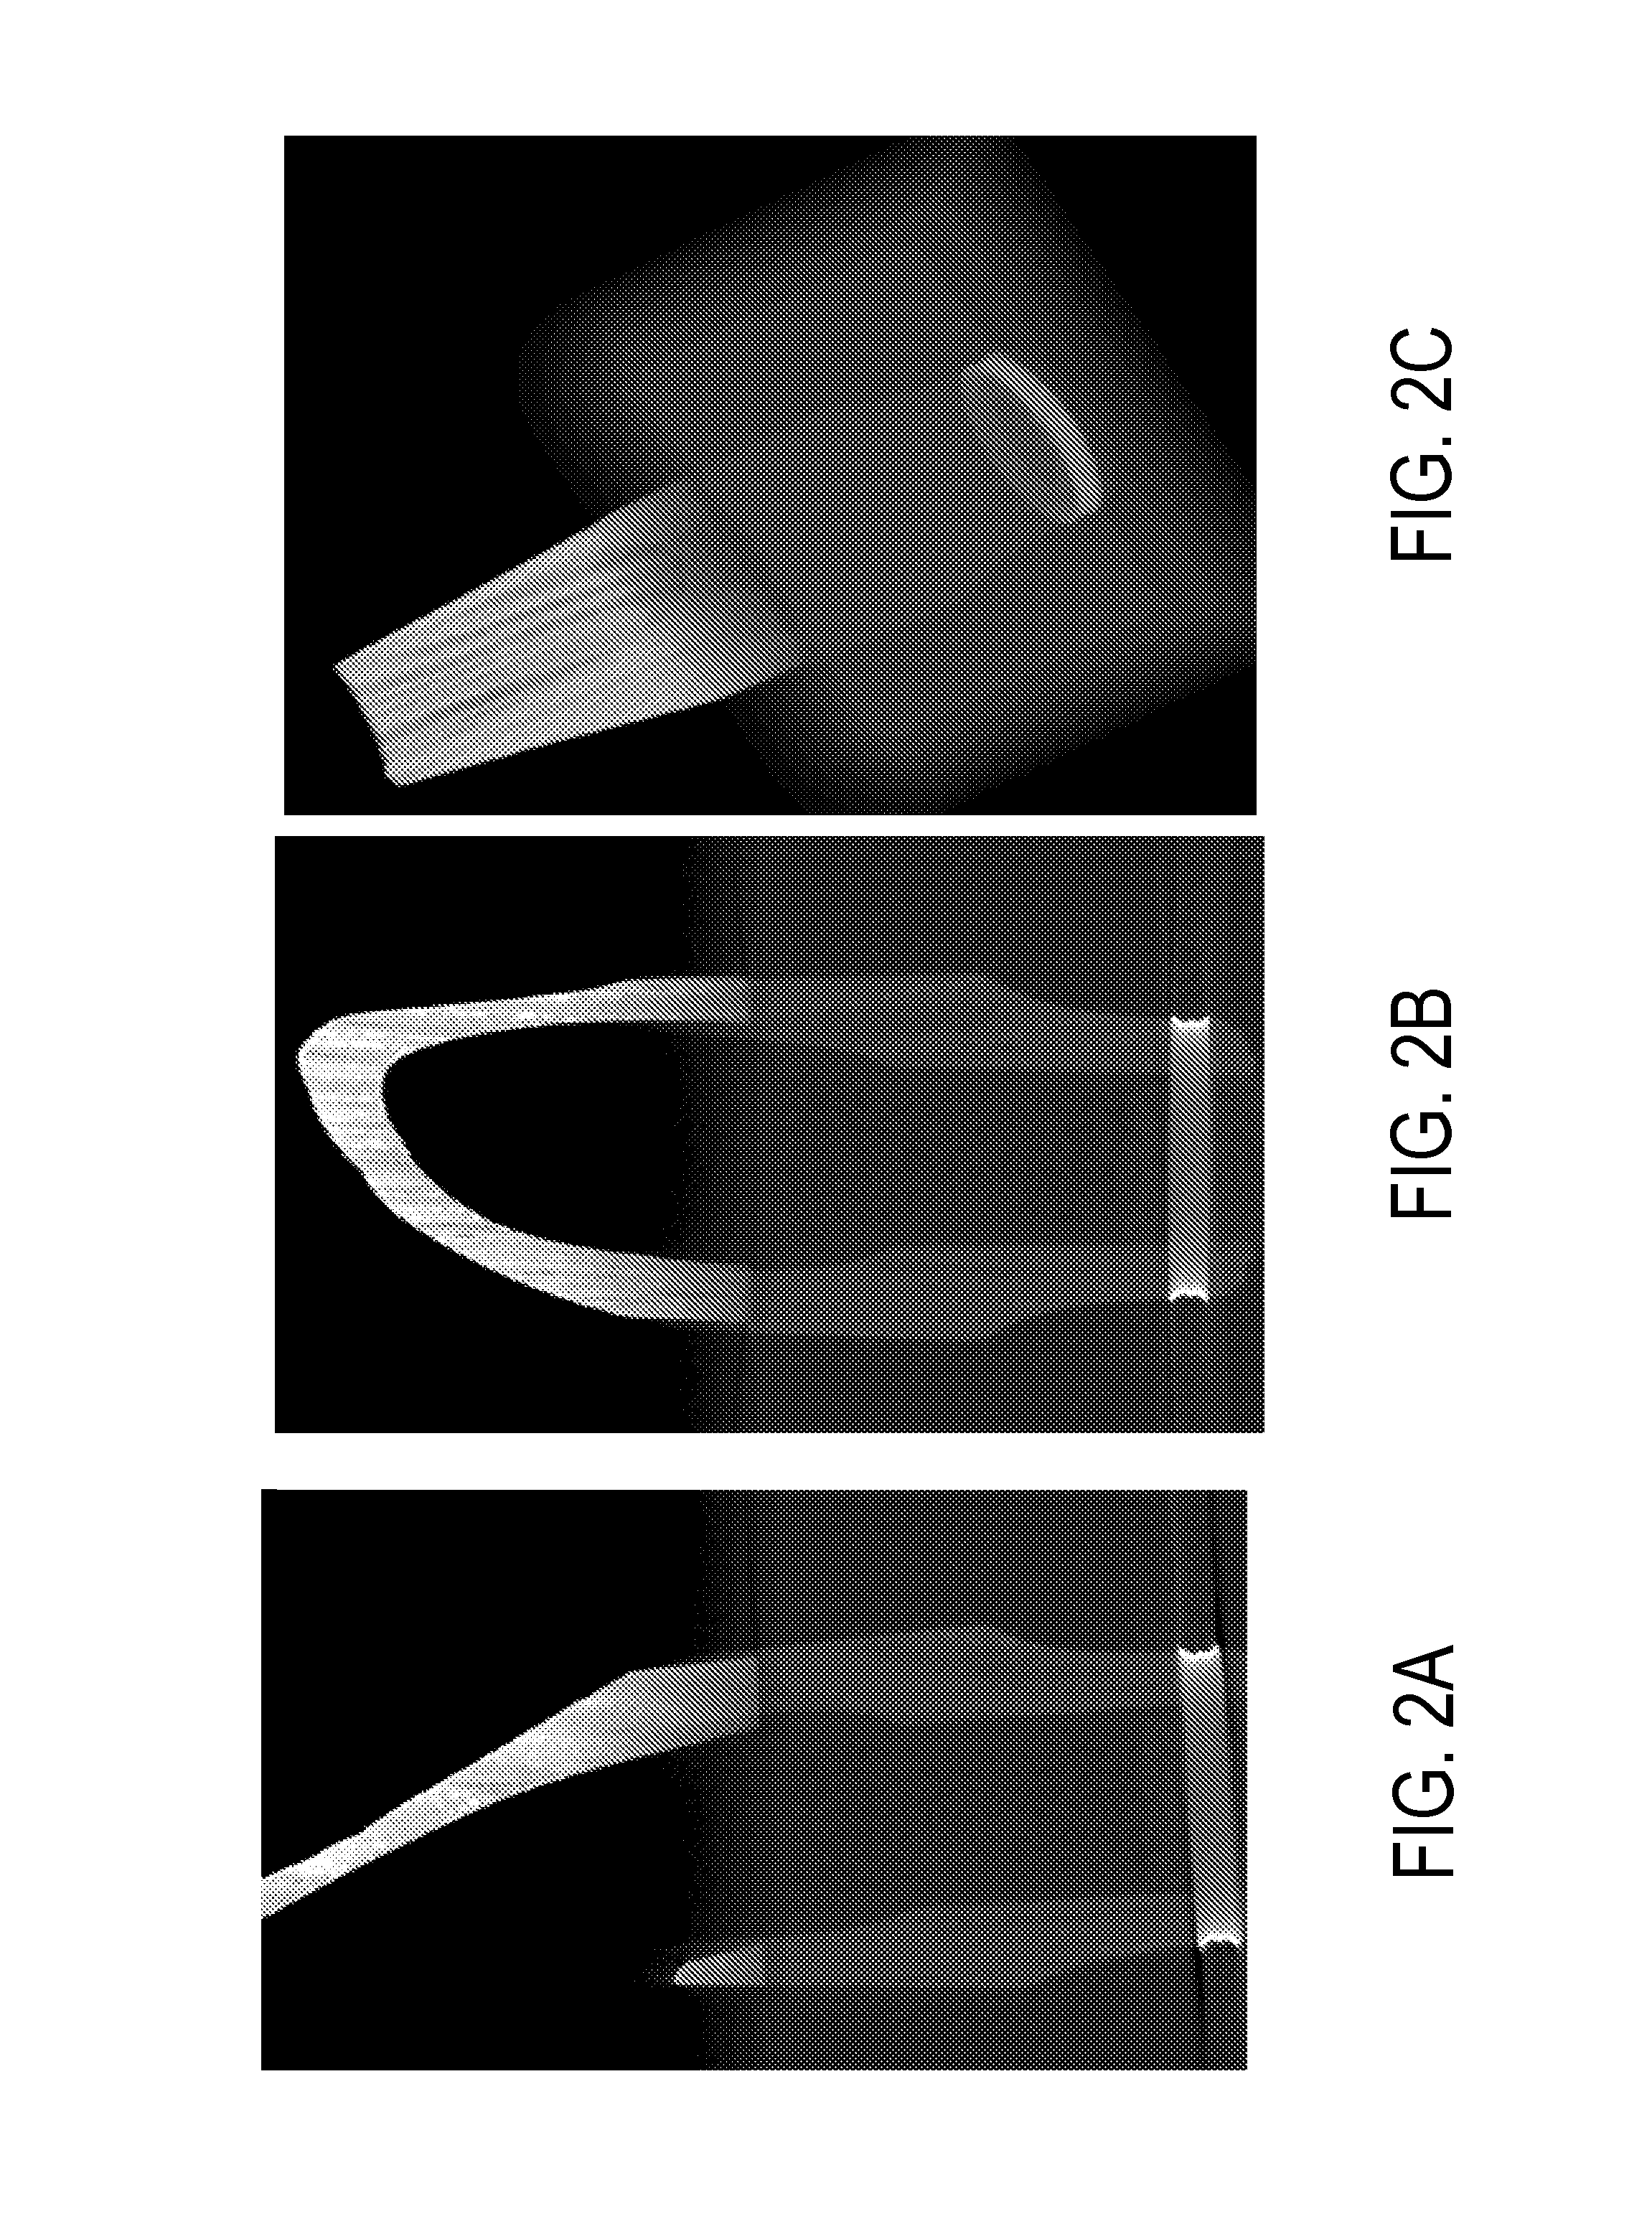 Methods and Systems for Non-Destructive Analysis of Objects and Production of Replica Objects